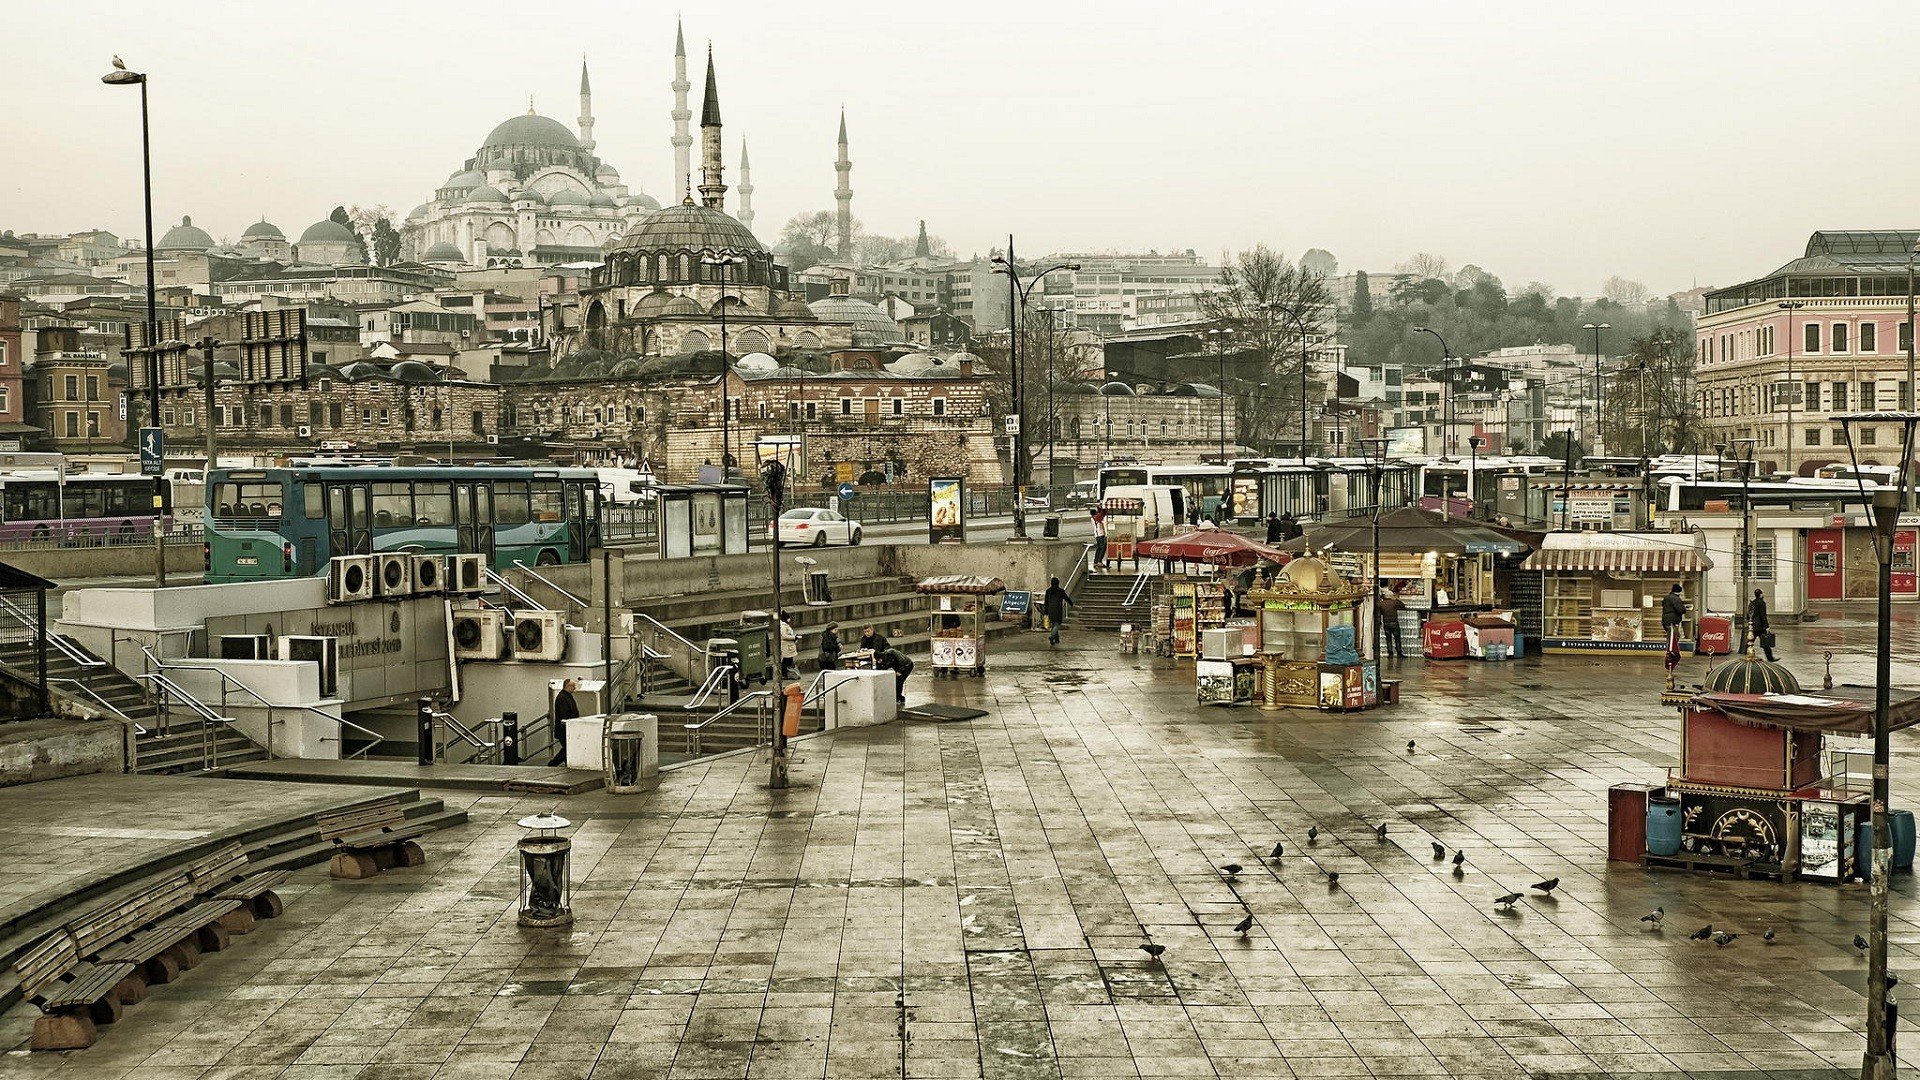 city, Istanbul, Turkey, Mosques, Architecture, Islamic, Architecture, Building, Buses, Town, Square, Car, Pigeons, Bench, Stairs, Overcast Wallpaper